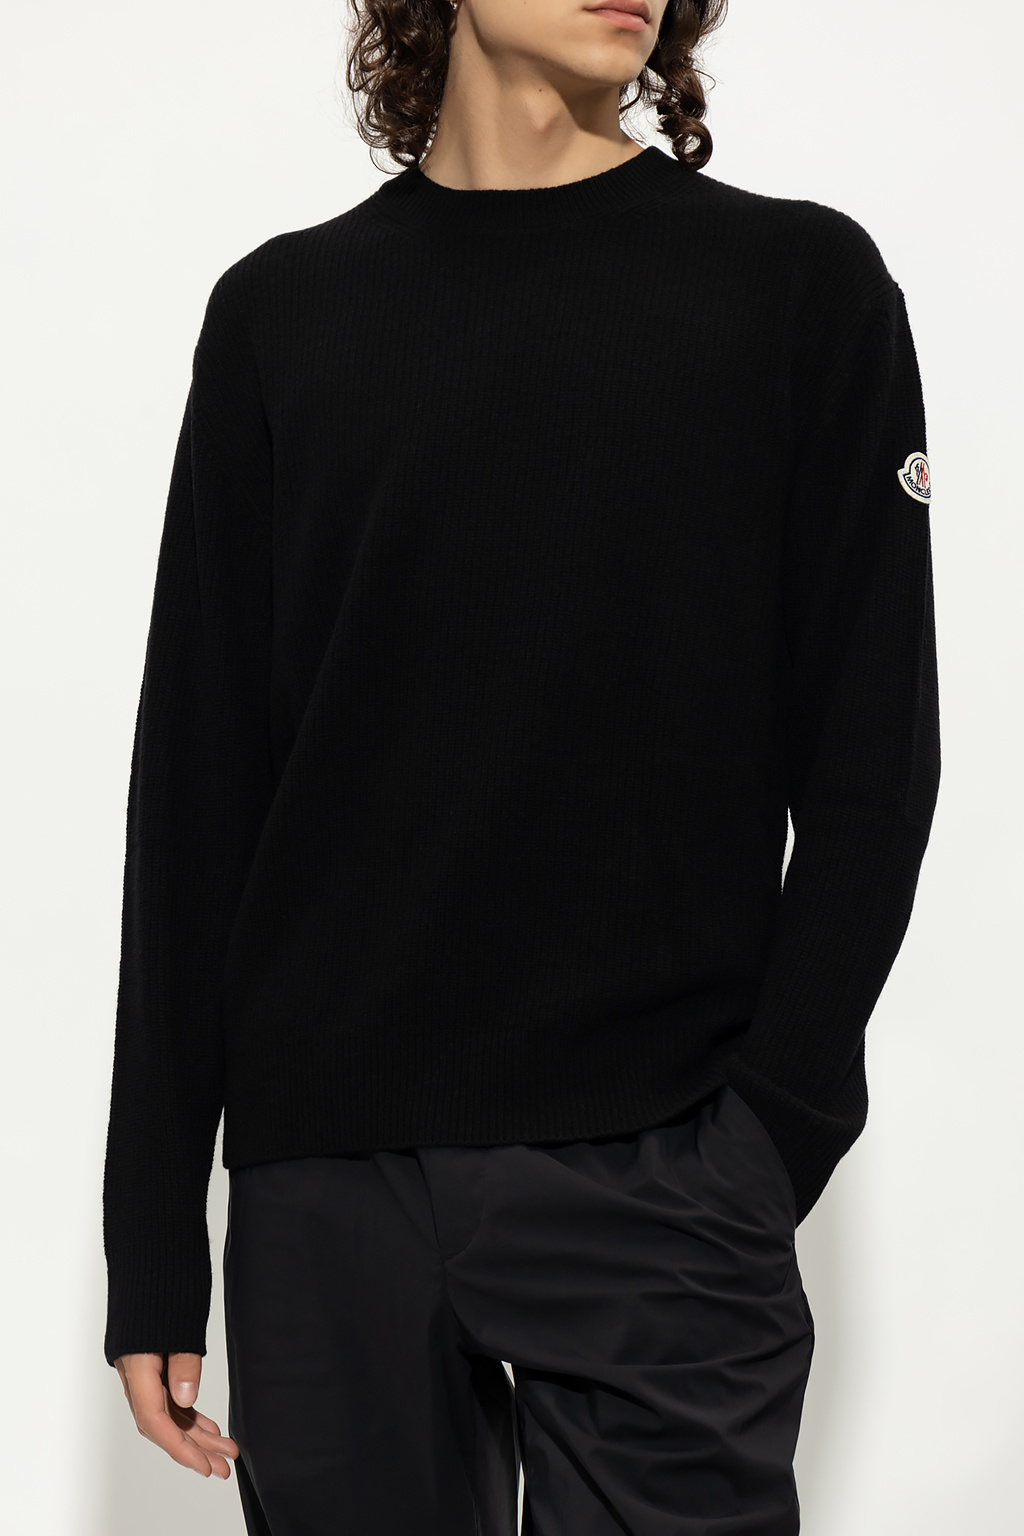 Moncler Wool Stand sweater